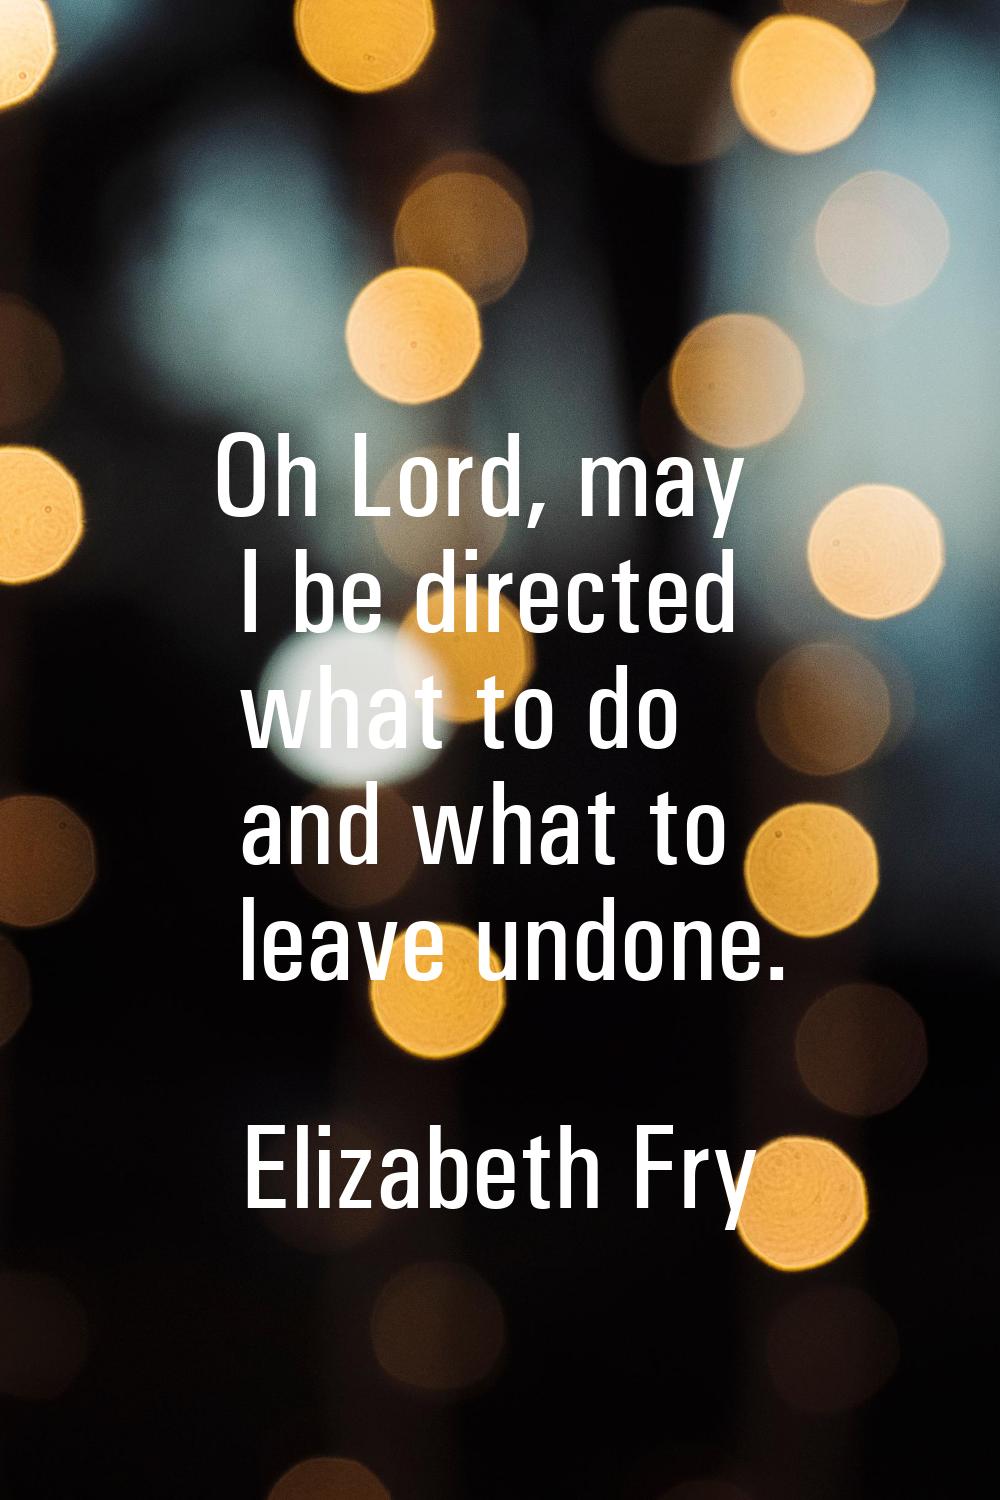 Oh Lord, may I be directed what to do and what to leave undone.